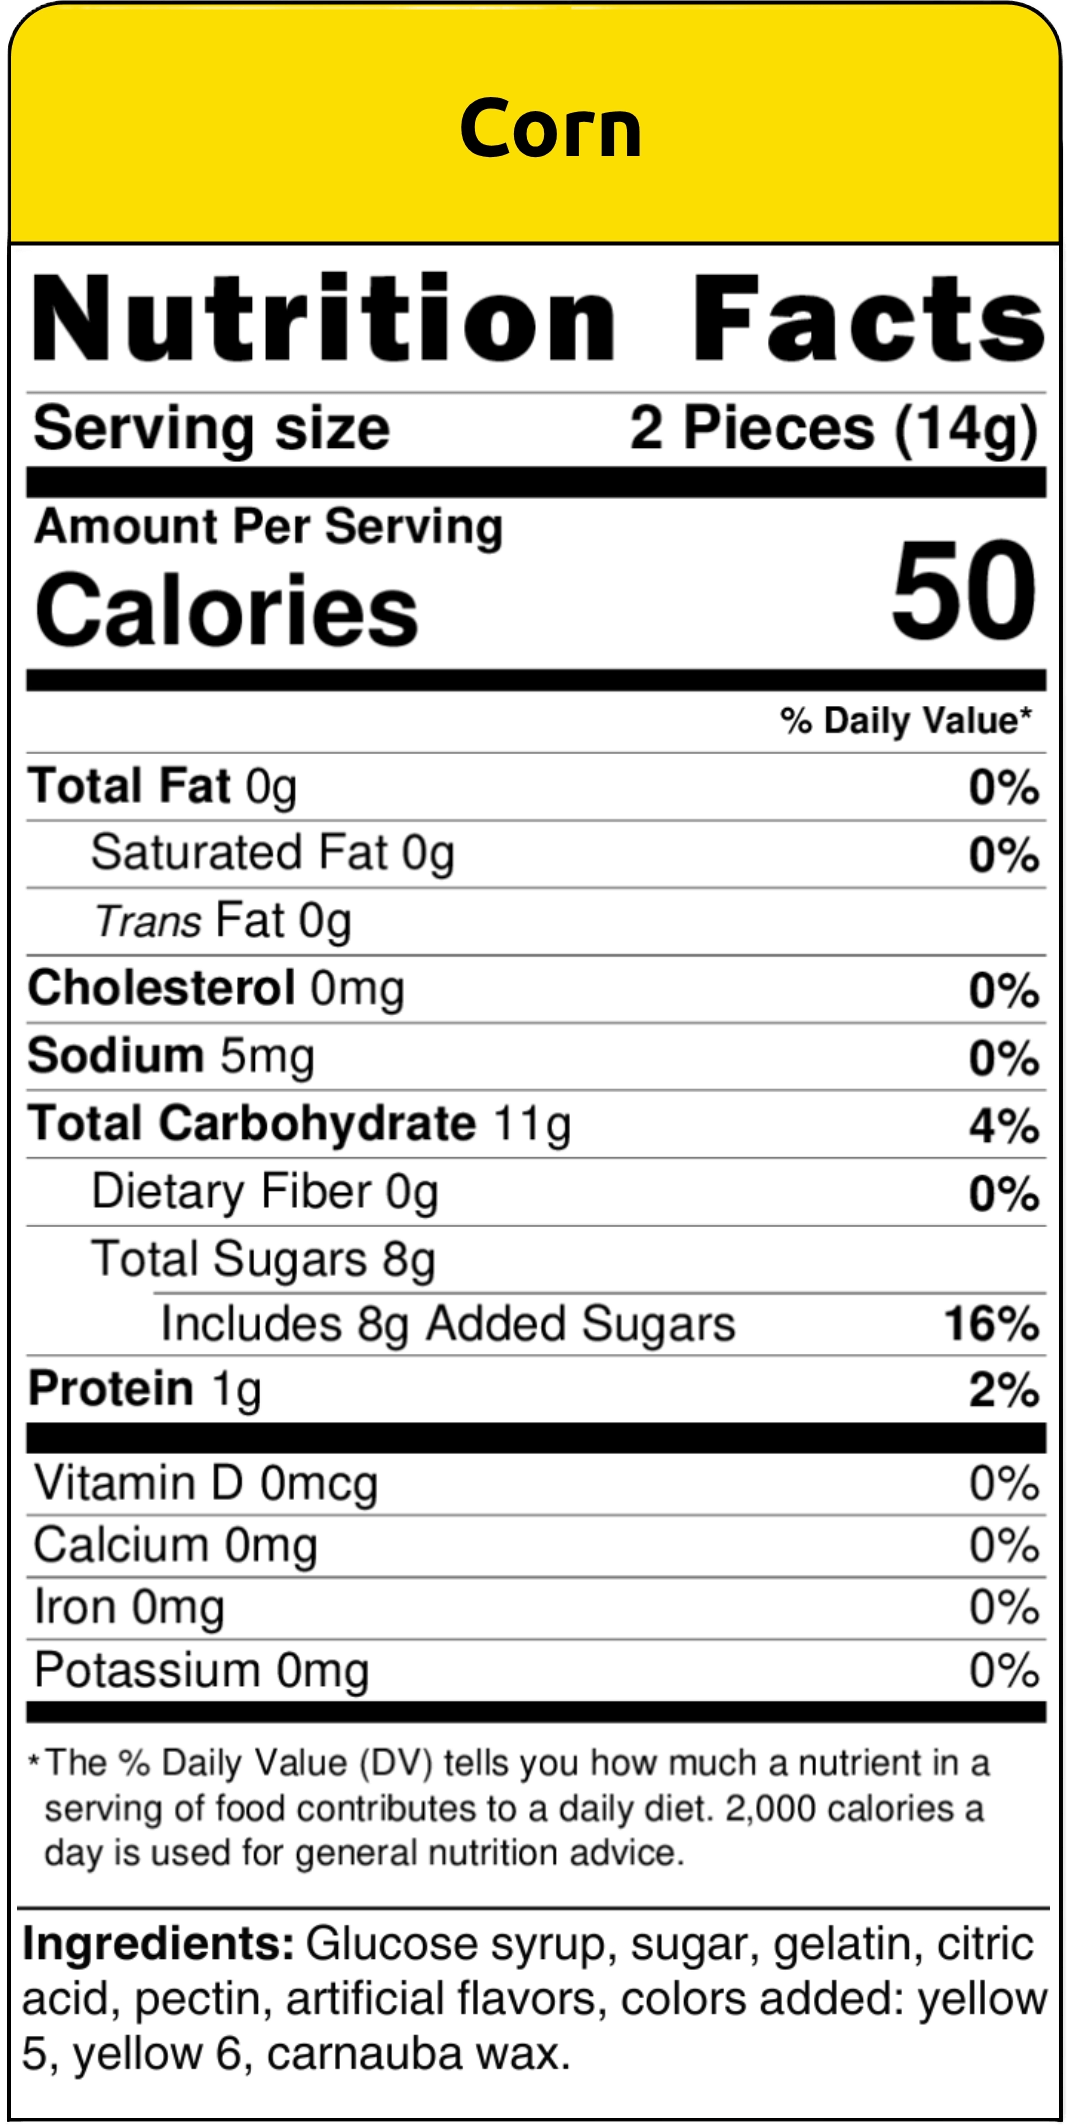 nutritional facts corn